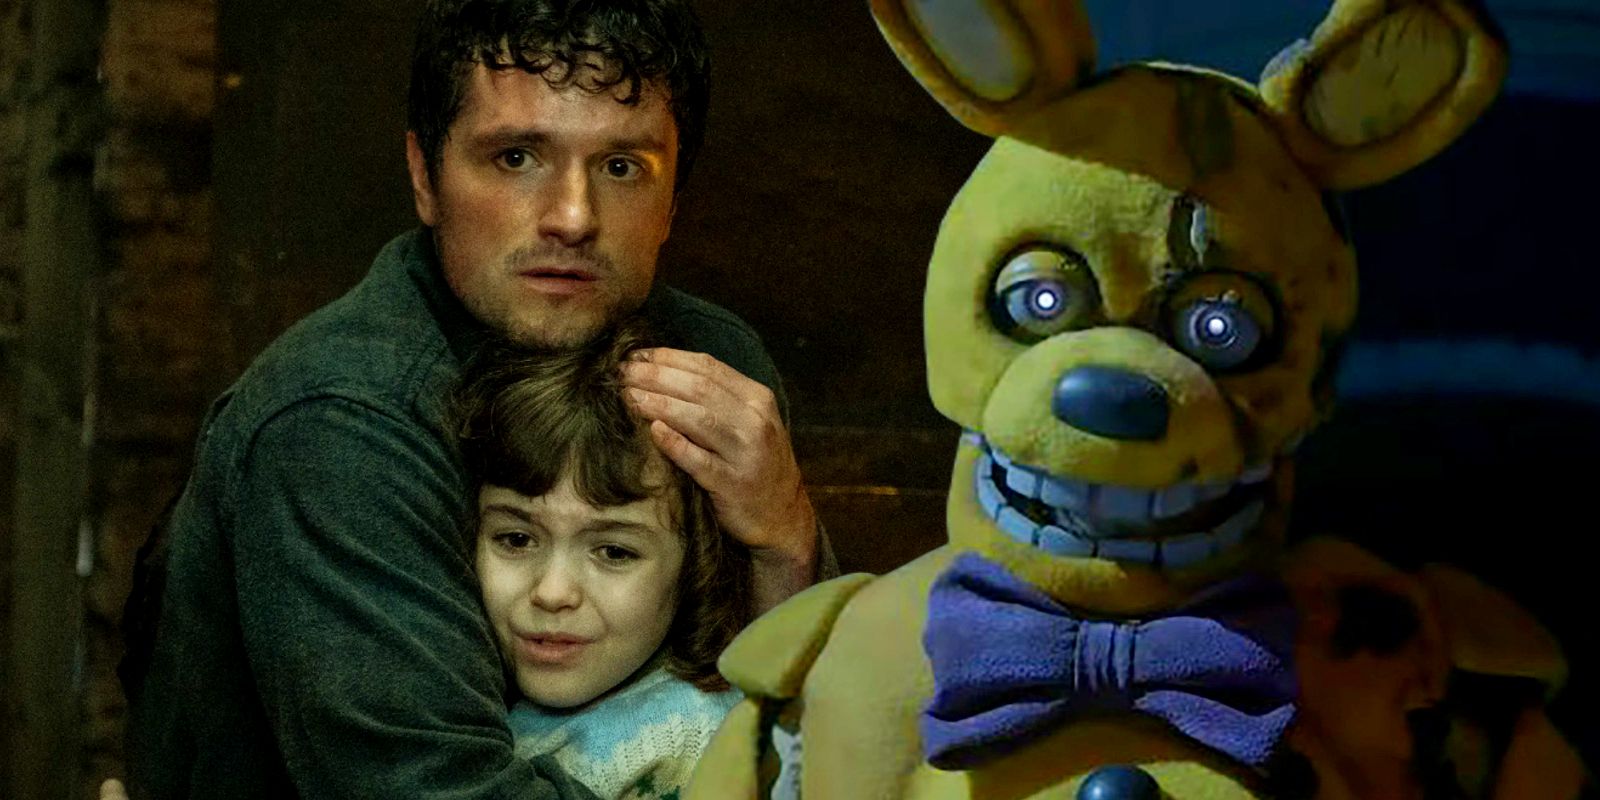 Mike, Abby, and Springtrap in the Five Nights at Freddy's movie